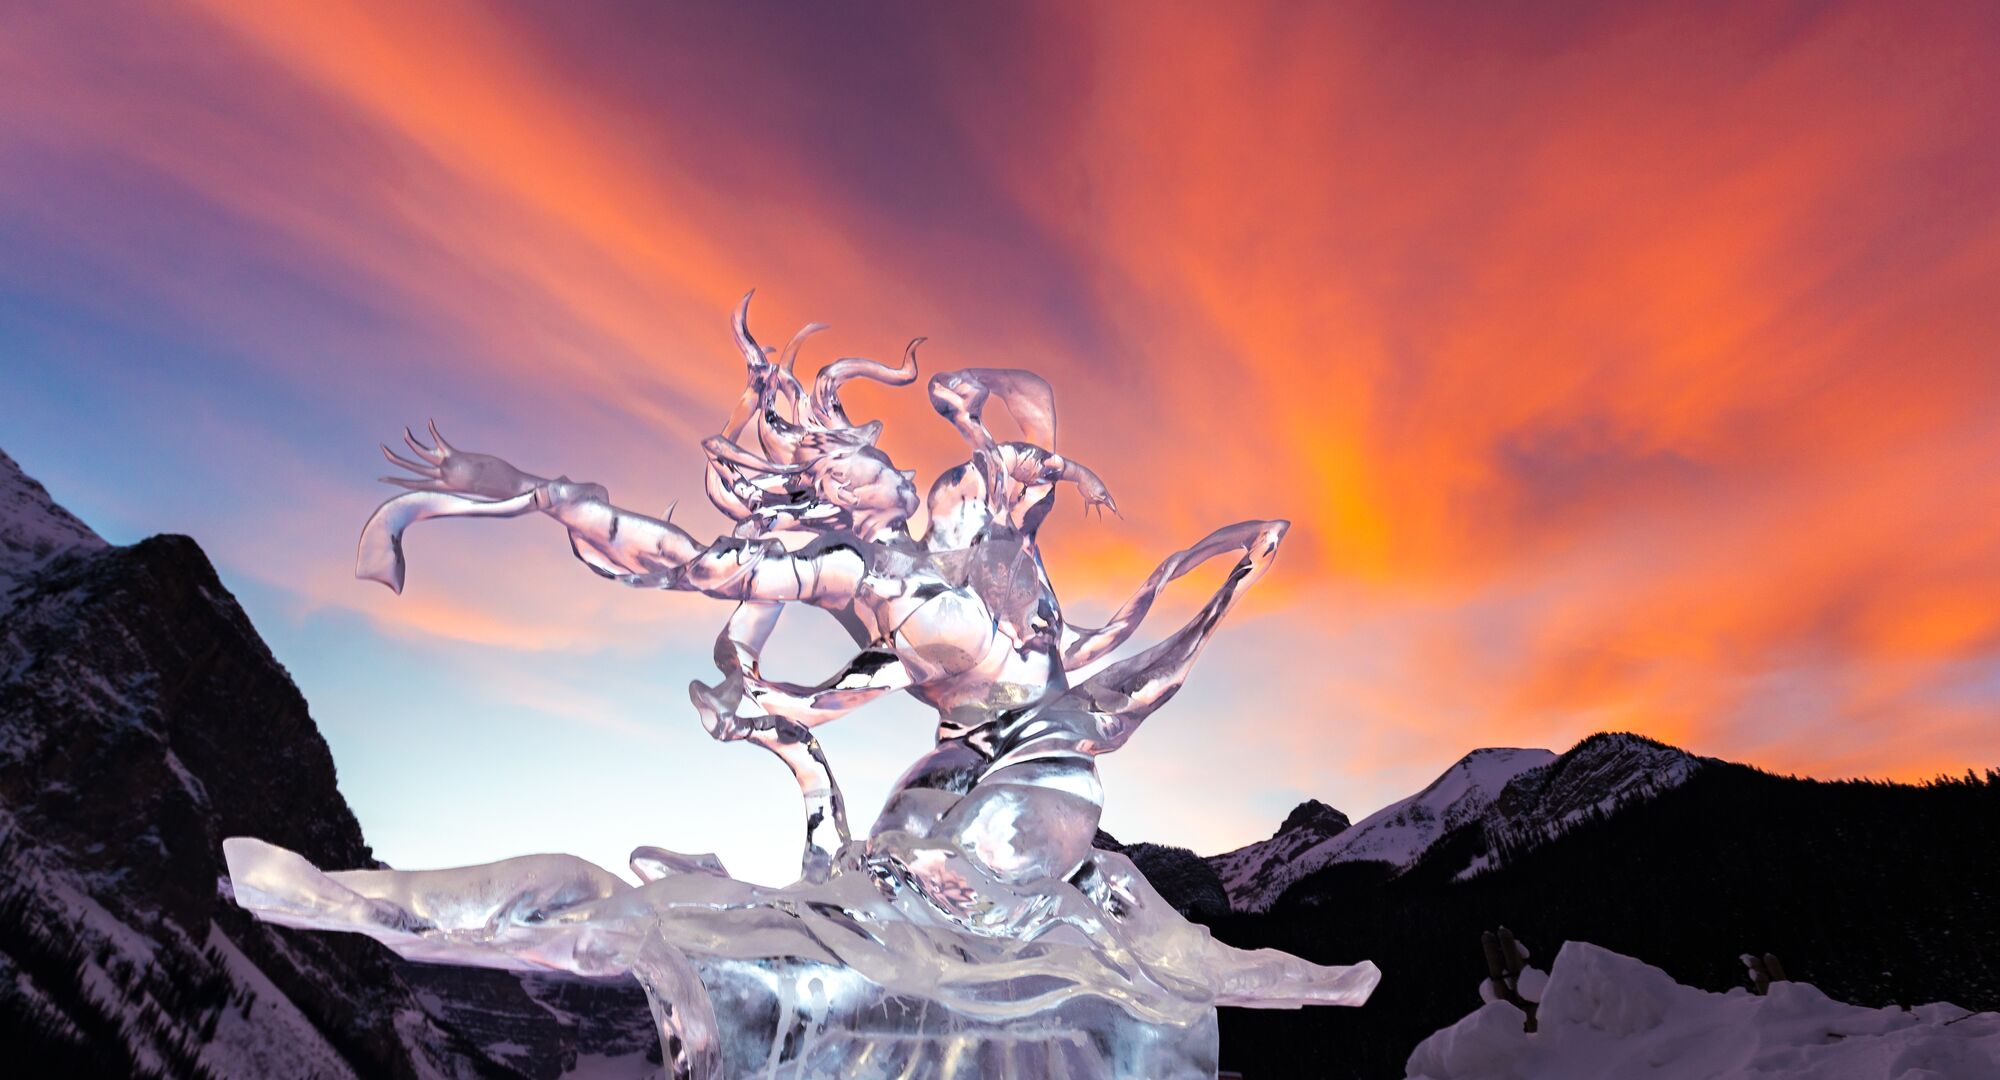 An ice sculpture of a woman dancing in front of a red sunset at Lake Louise.